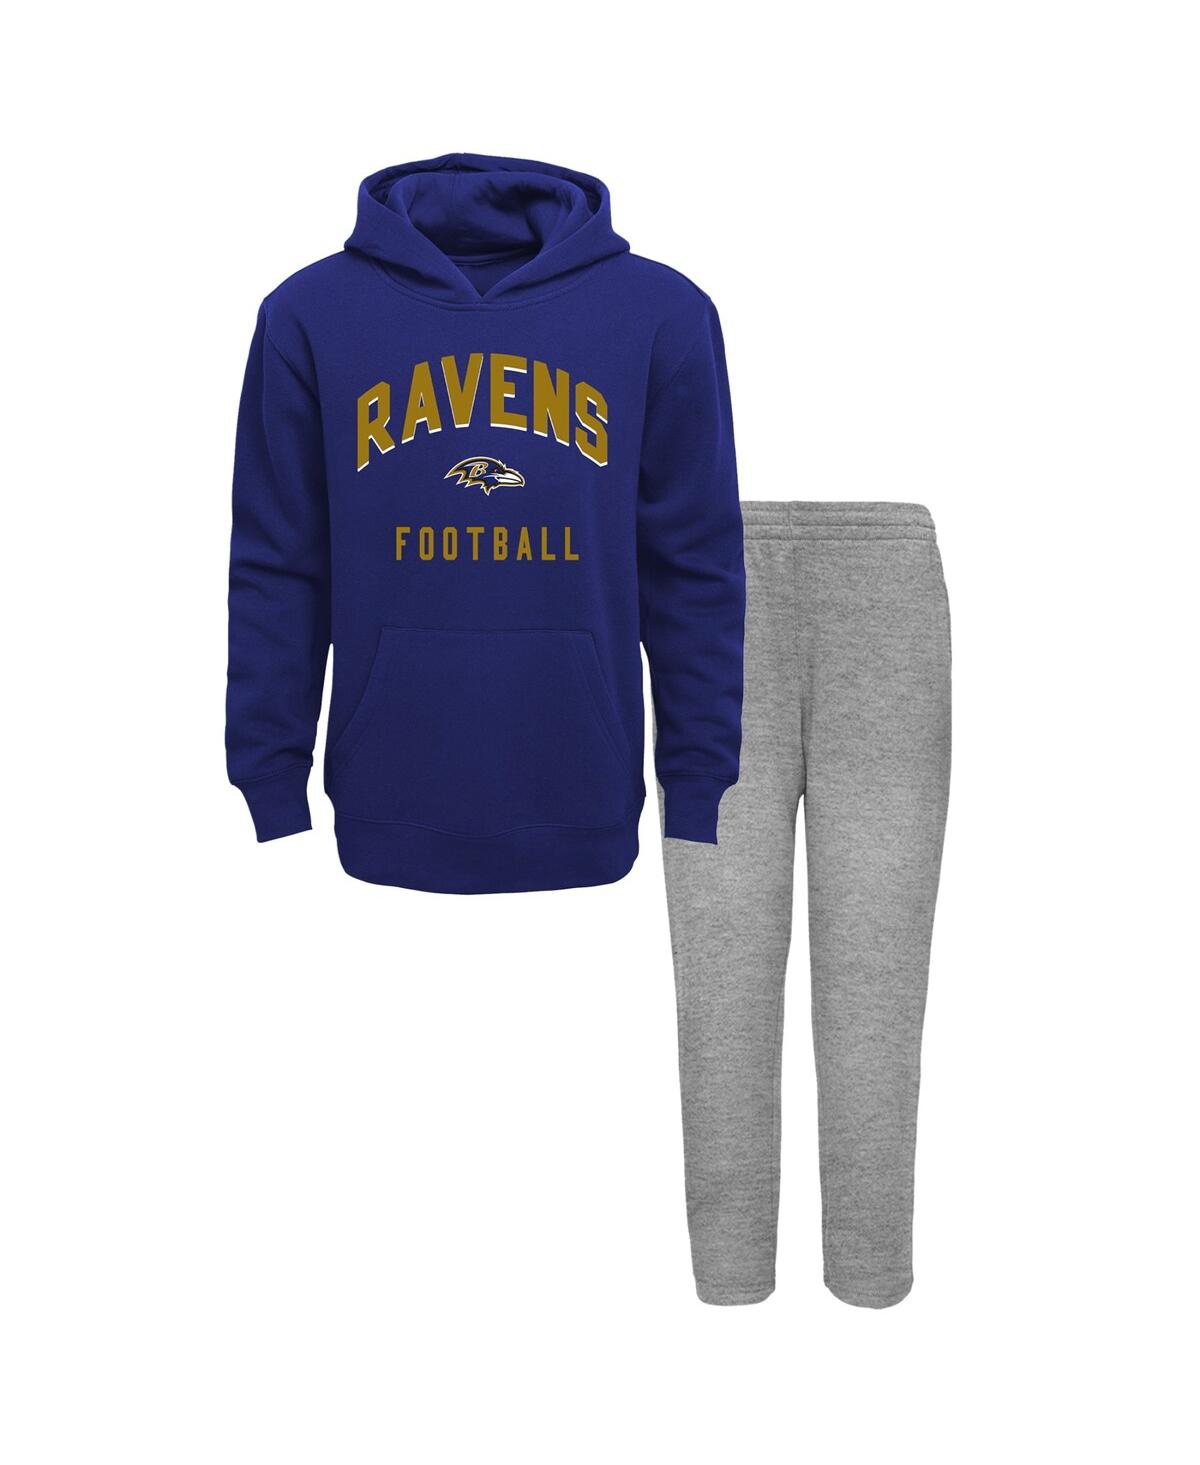 Outerstuff Babies' Toddler Boys Purple, Heather Gray Baltimore Ravens Play By Play Pullover Hoodie And Pants Set In Purple,heather Gray